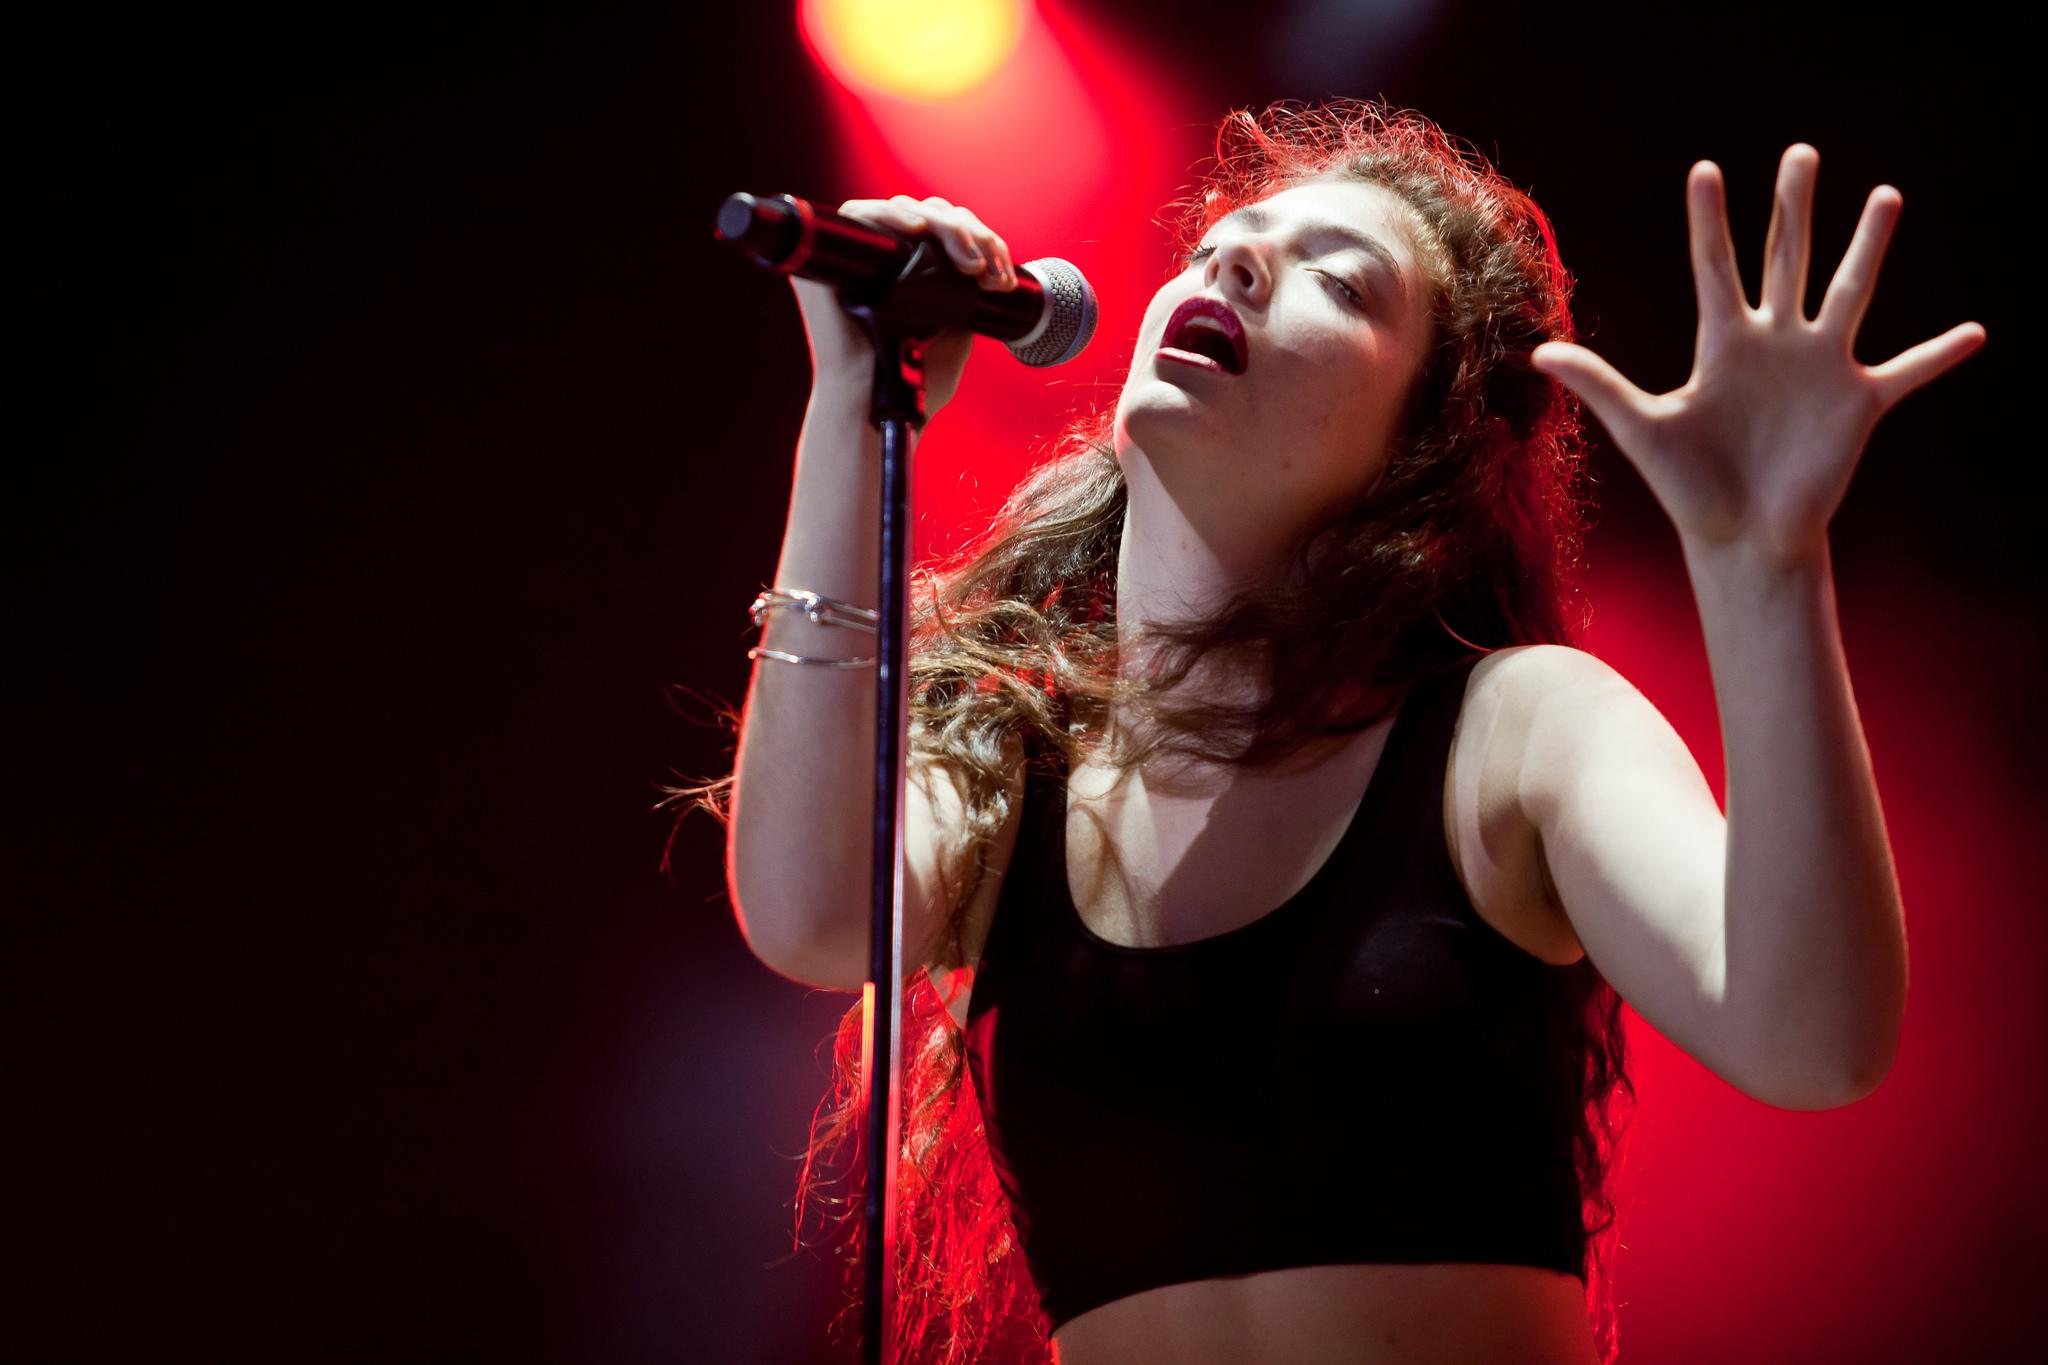 Lorde performs in 2014 at Lollapalooza Brasil. The singer-songwriter performs Thursday in Chicago. (Liliane Callegari / Flickr)